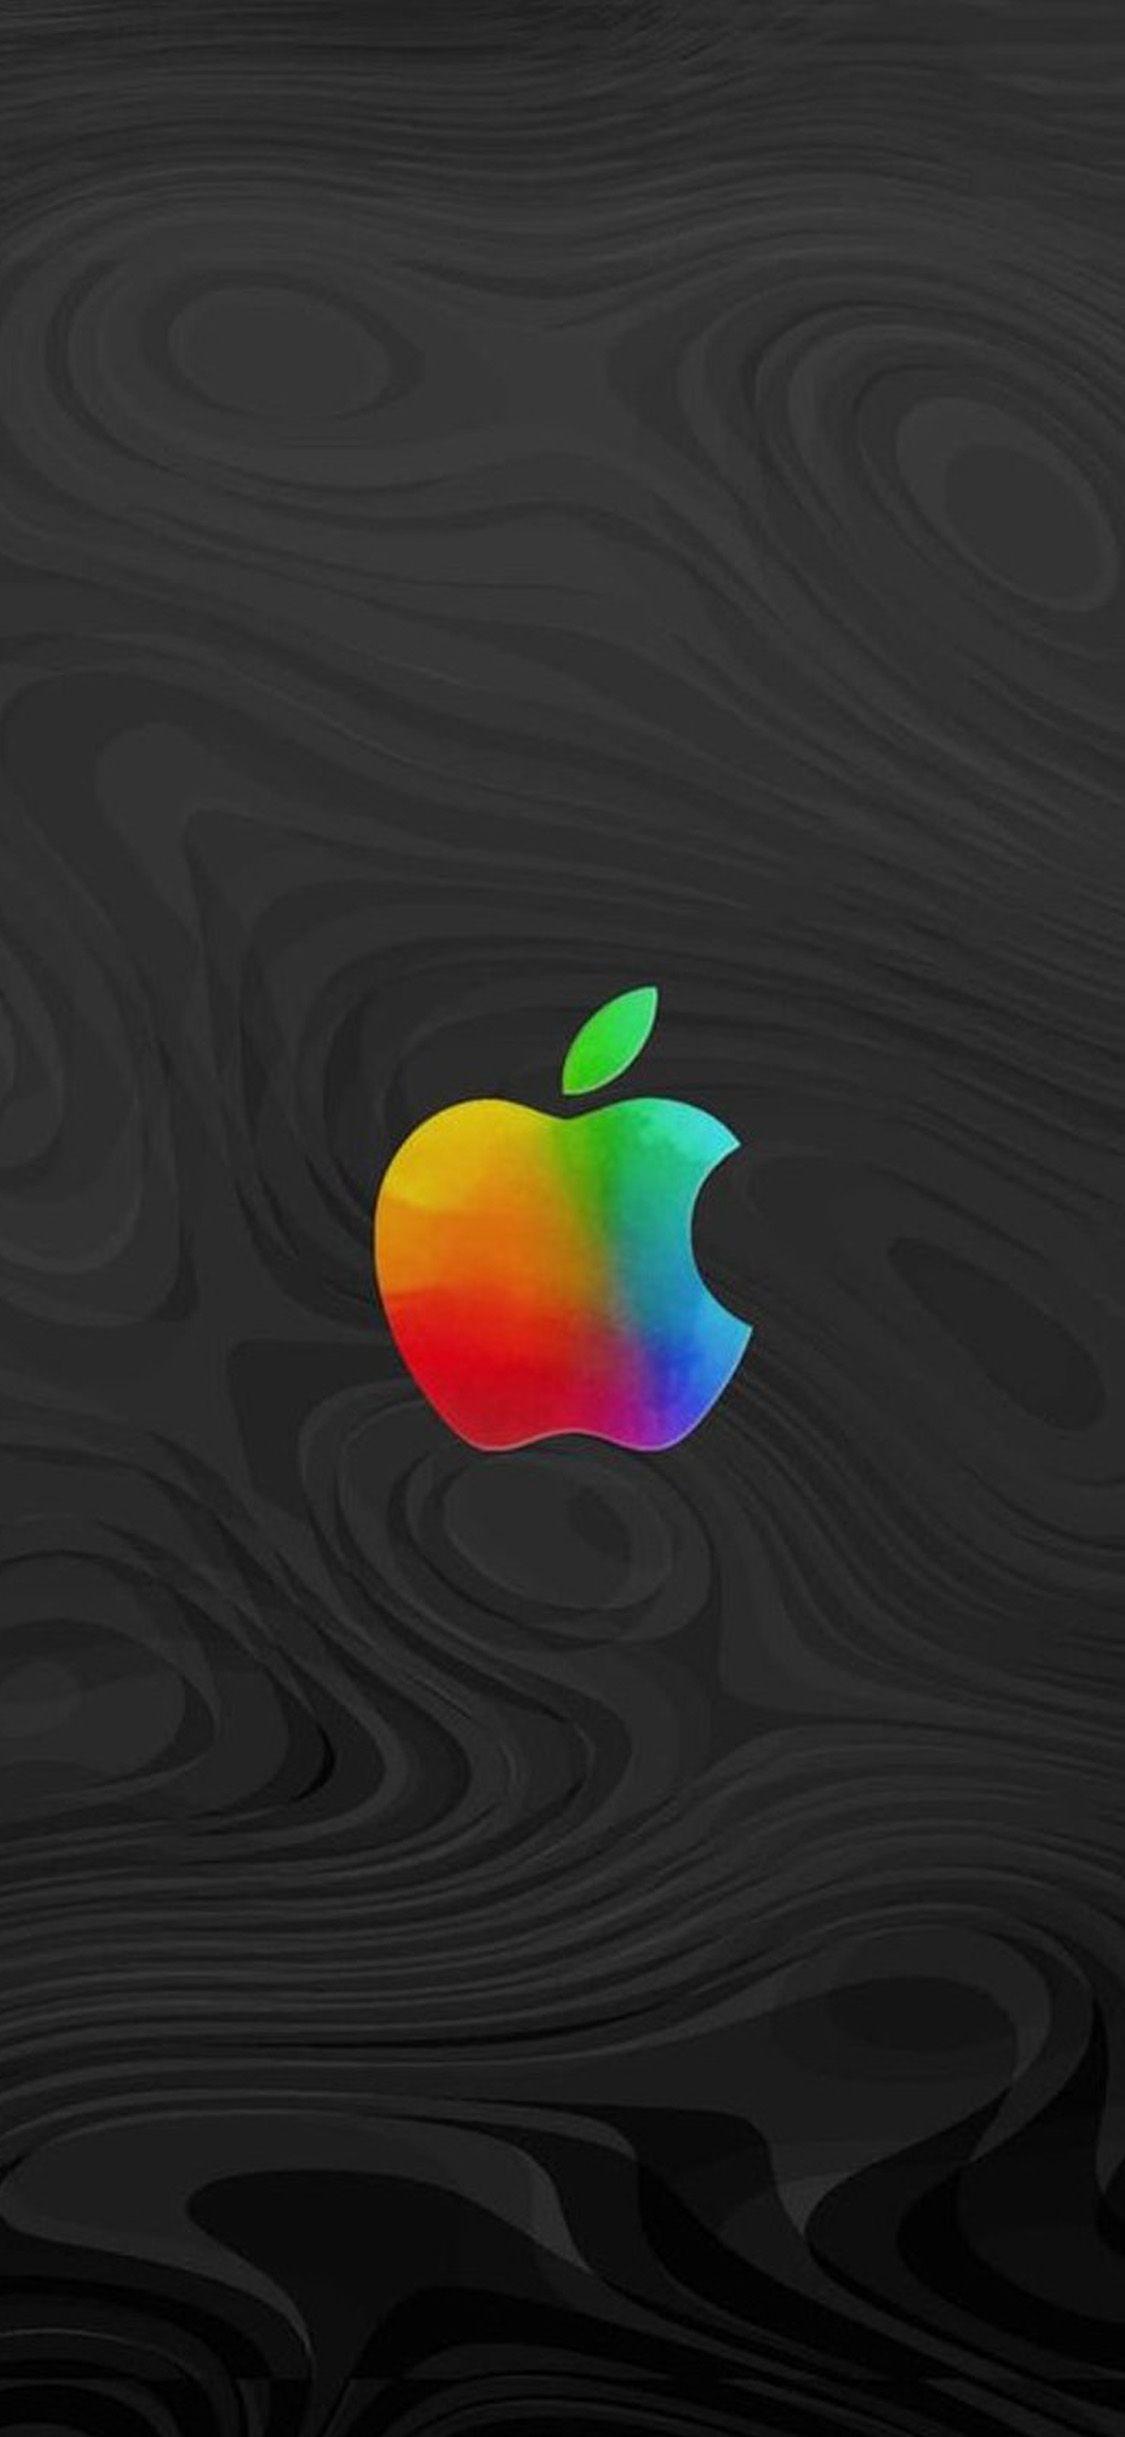 Colorful Apple Logo - Colorful Apple LOGO 03 iPhone X2 Wallpapers Download-iPhoneX2Wallpaper